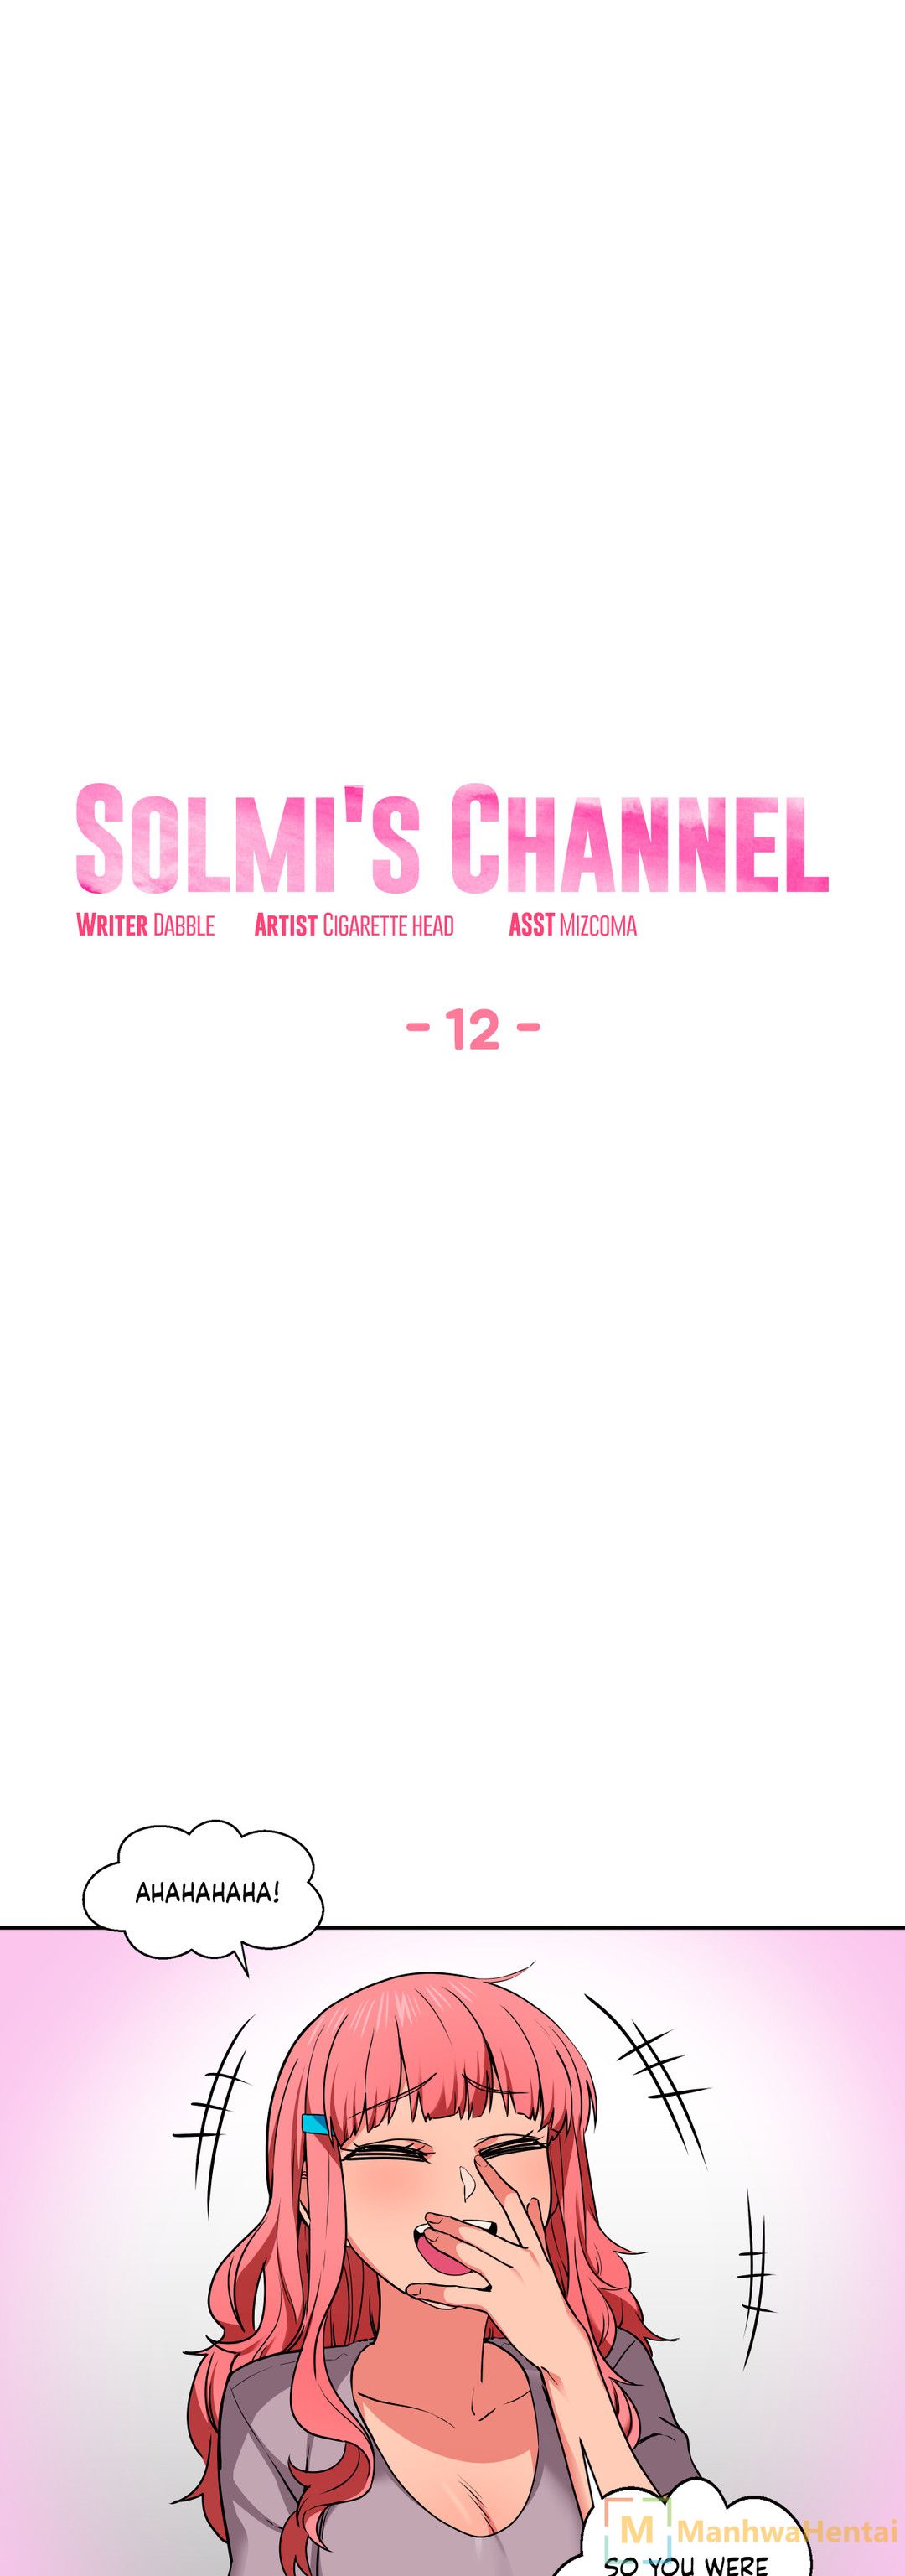 Solmi’s Channel image